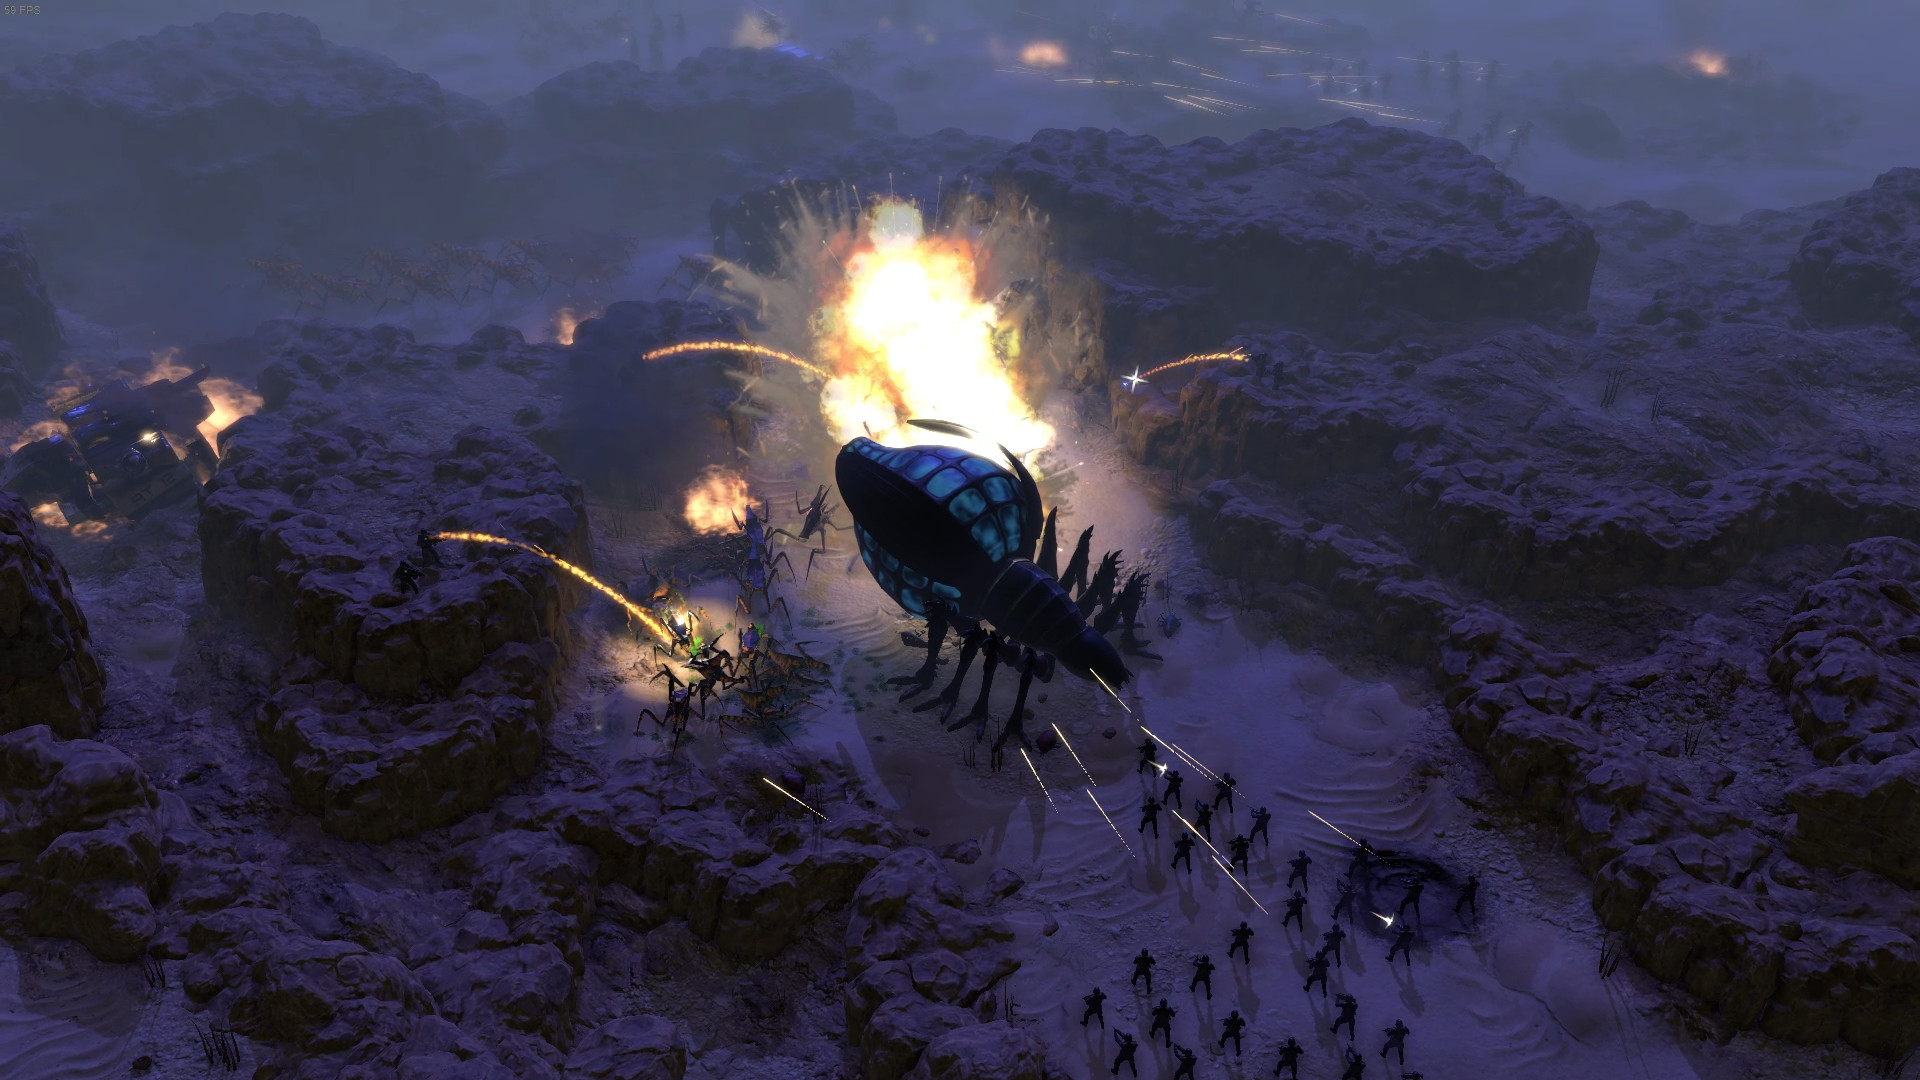 Starship Troopers: Terran Command Free Download for PC